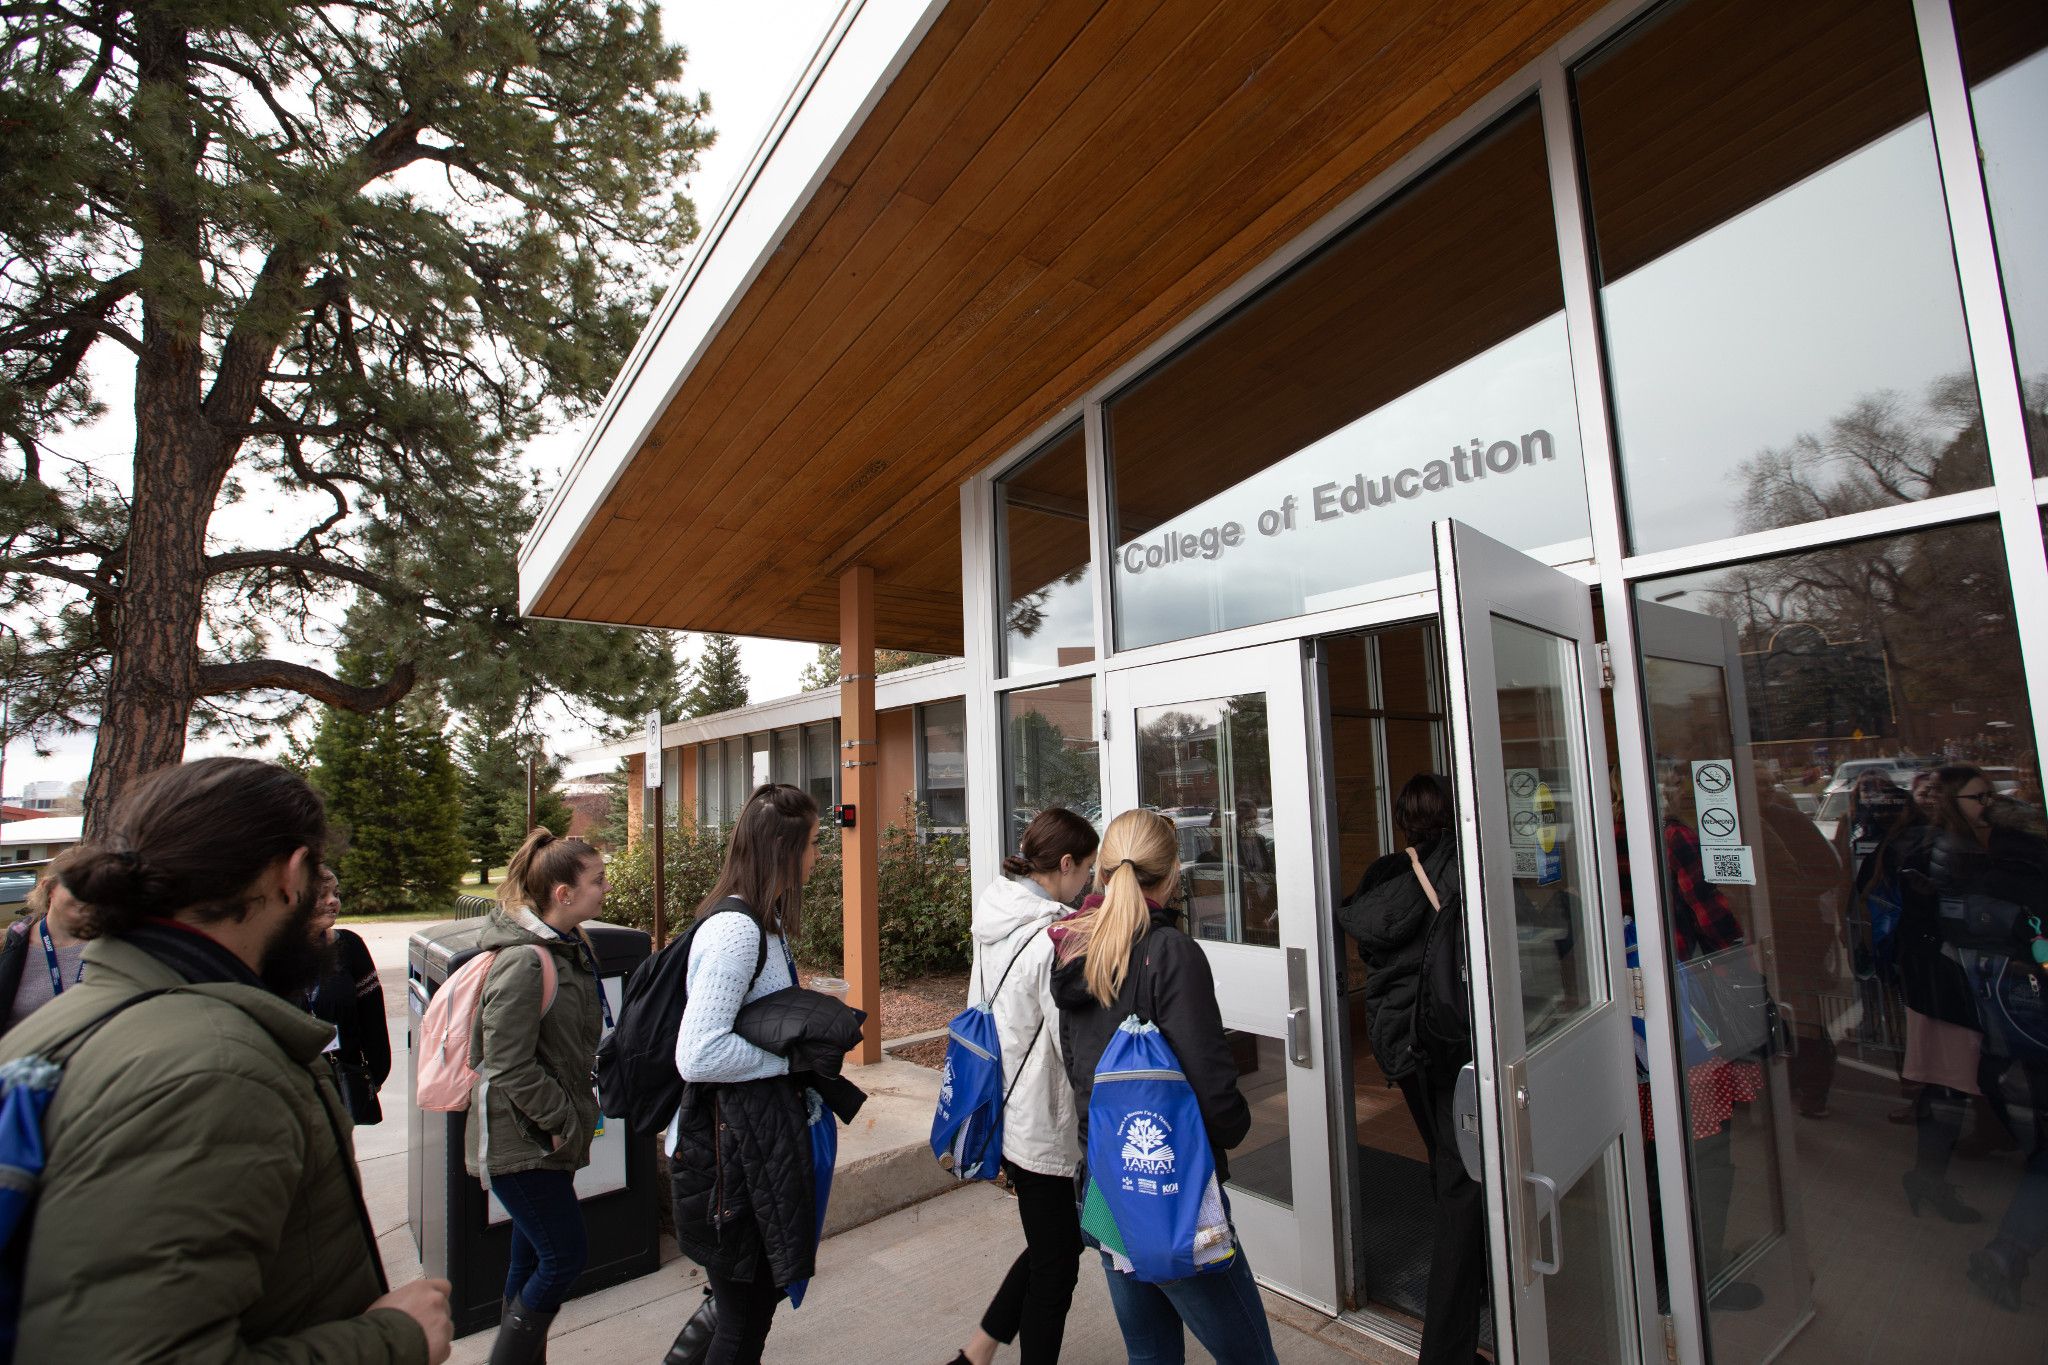 People entering the College of Education building.